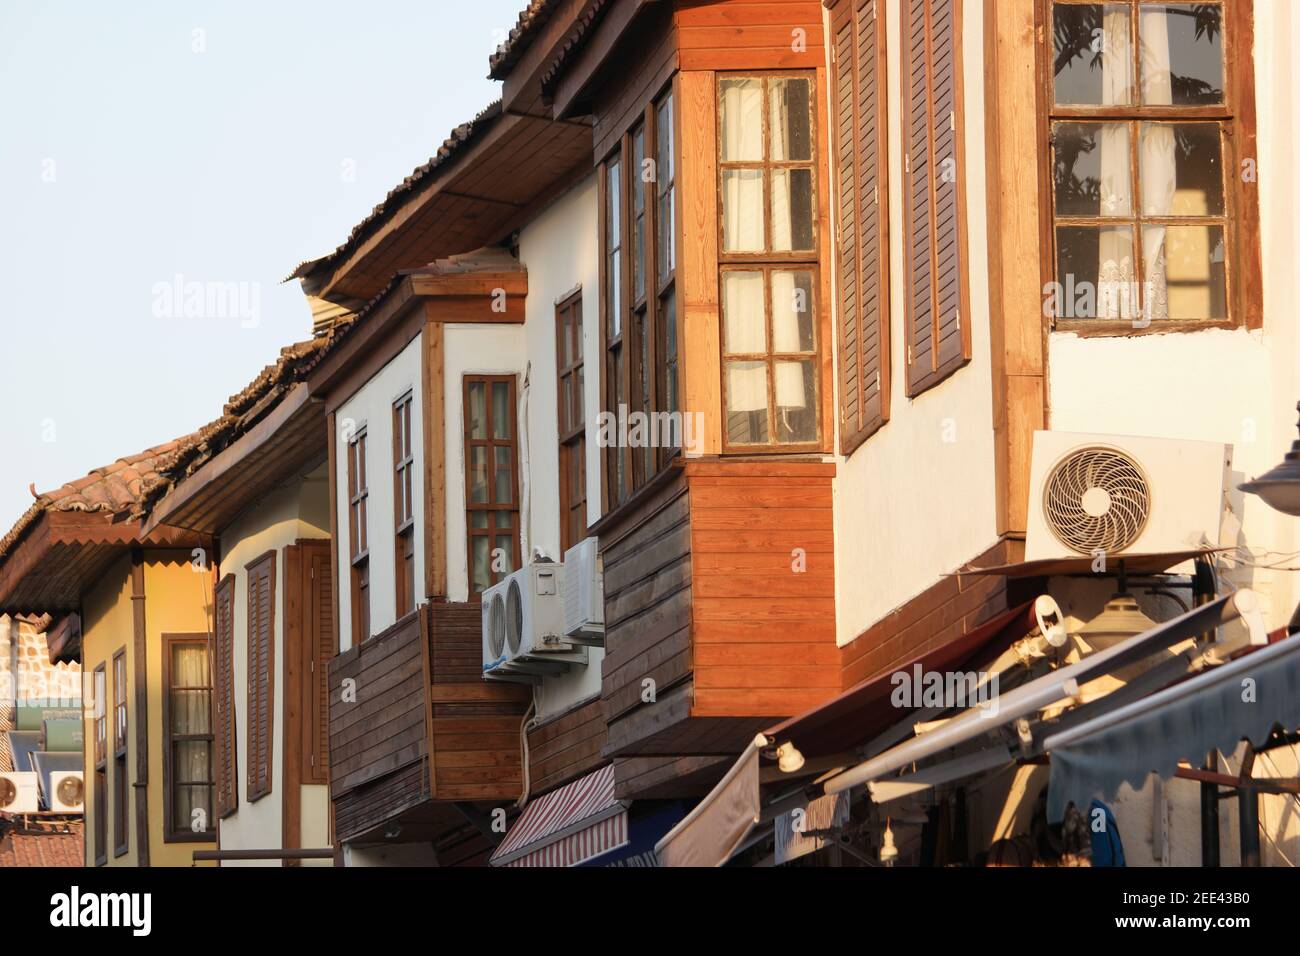 View to the traditional Turkish houses with balconies. Stock Photo